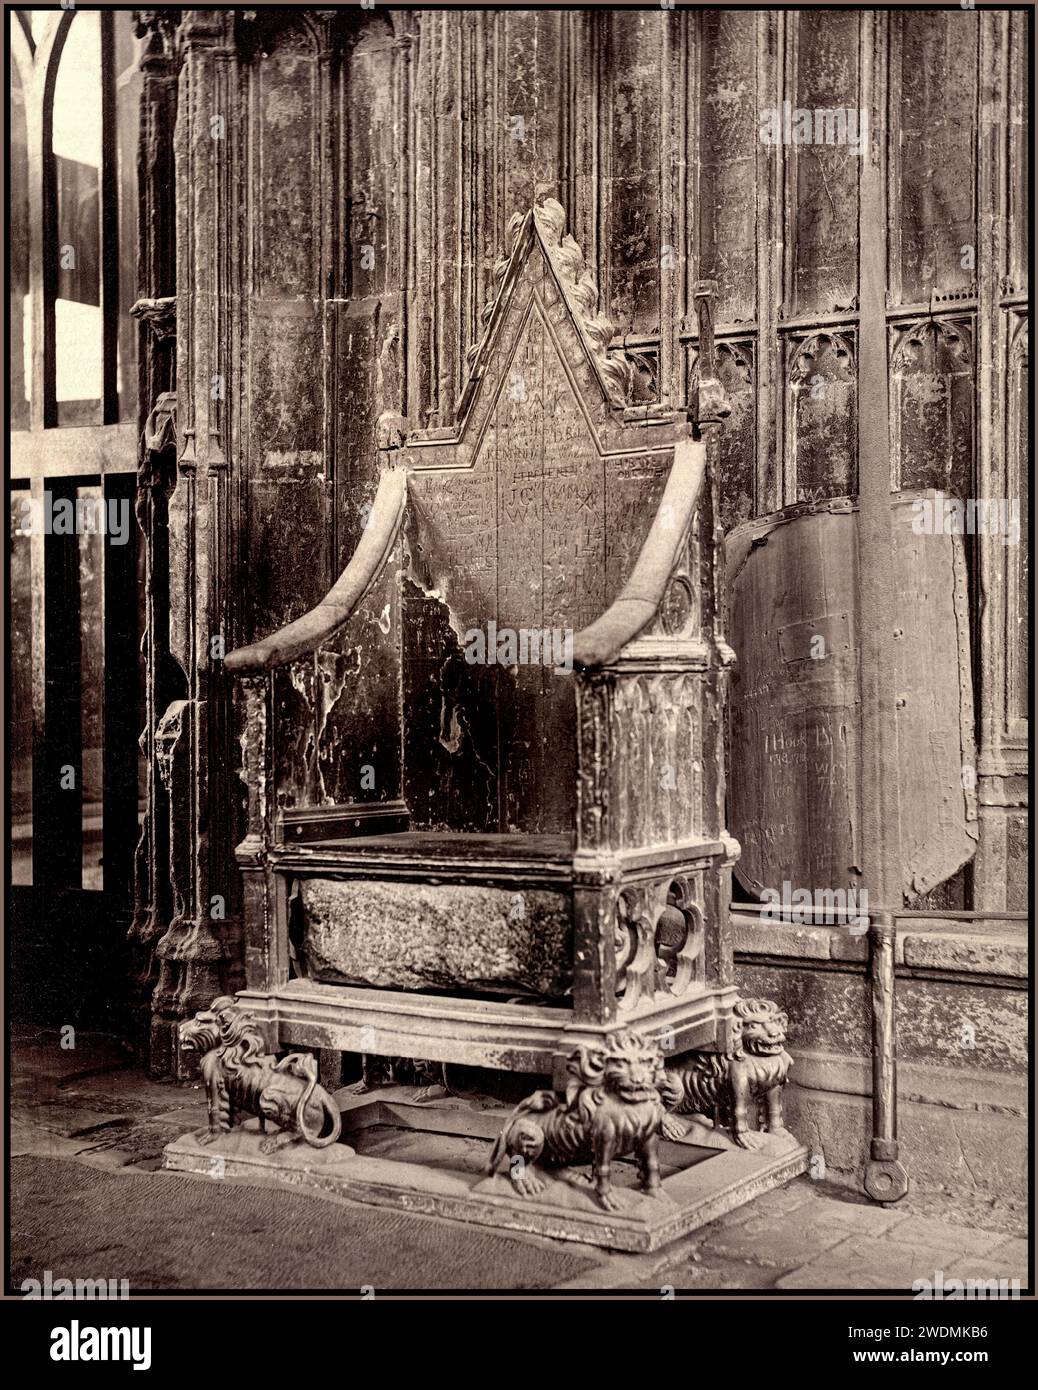 Coronation Chair with Stone of Scone, Westminster Abbey London UK ca. 1875-ca. 1885 (photograph) 1307 (Coronation chair) London, Greater London, England, United Kingdom United Kingdom albumen prints collegiate churches  Westminster Abbey, London, England  Collegiate Church of Saint Peter, Westminster, London, England  Cathedrals Religious interiors thrones ceremonial chairs  ceremonial objects Stone of Scone Stock Photo